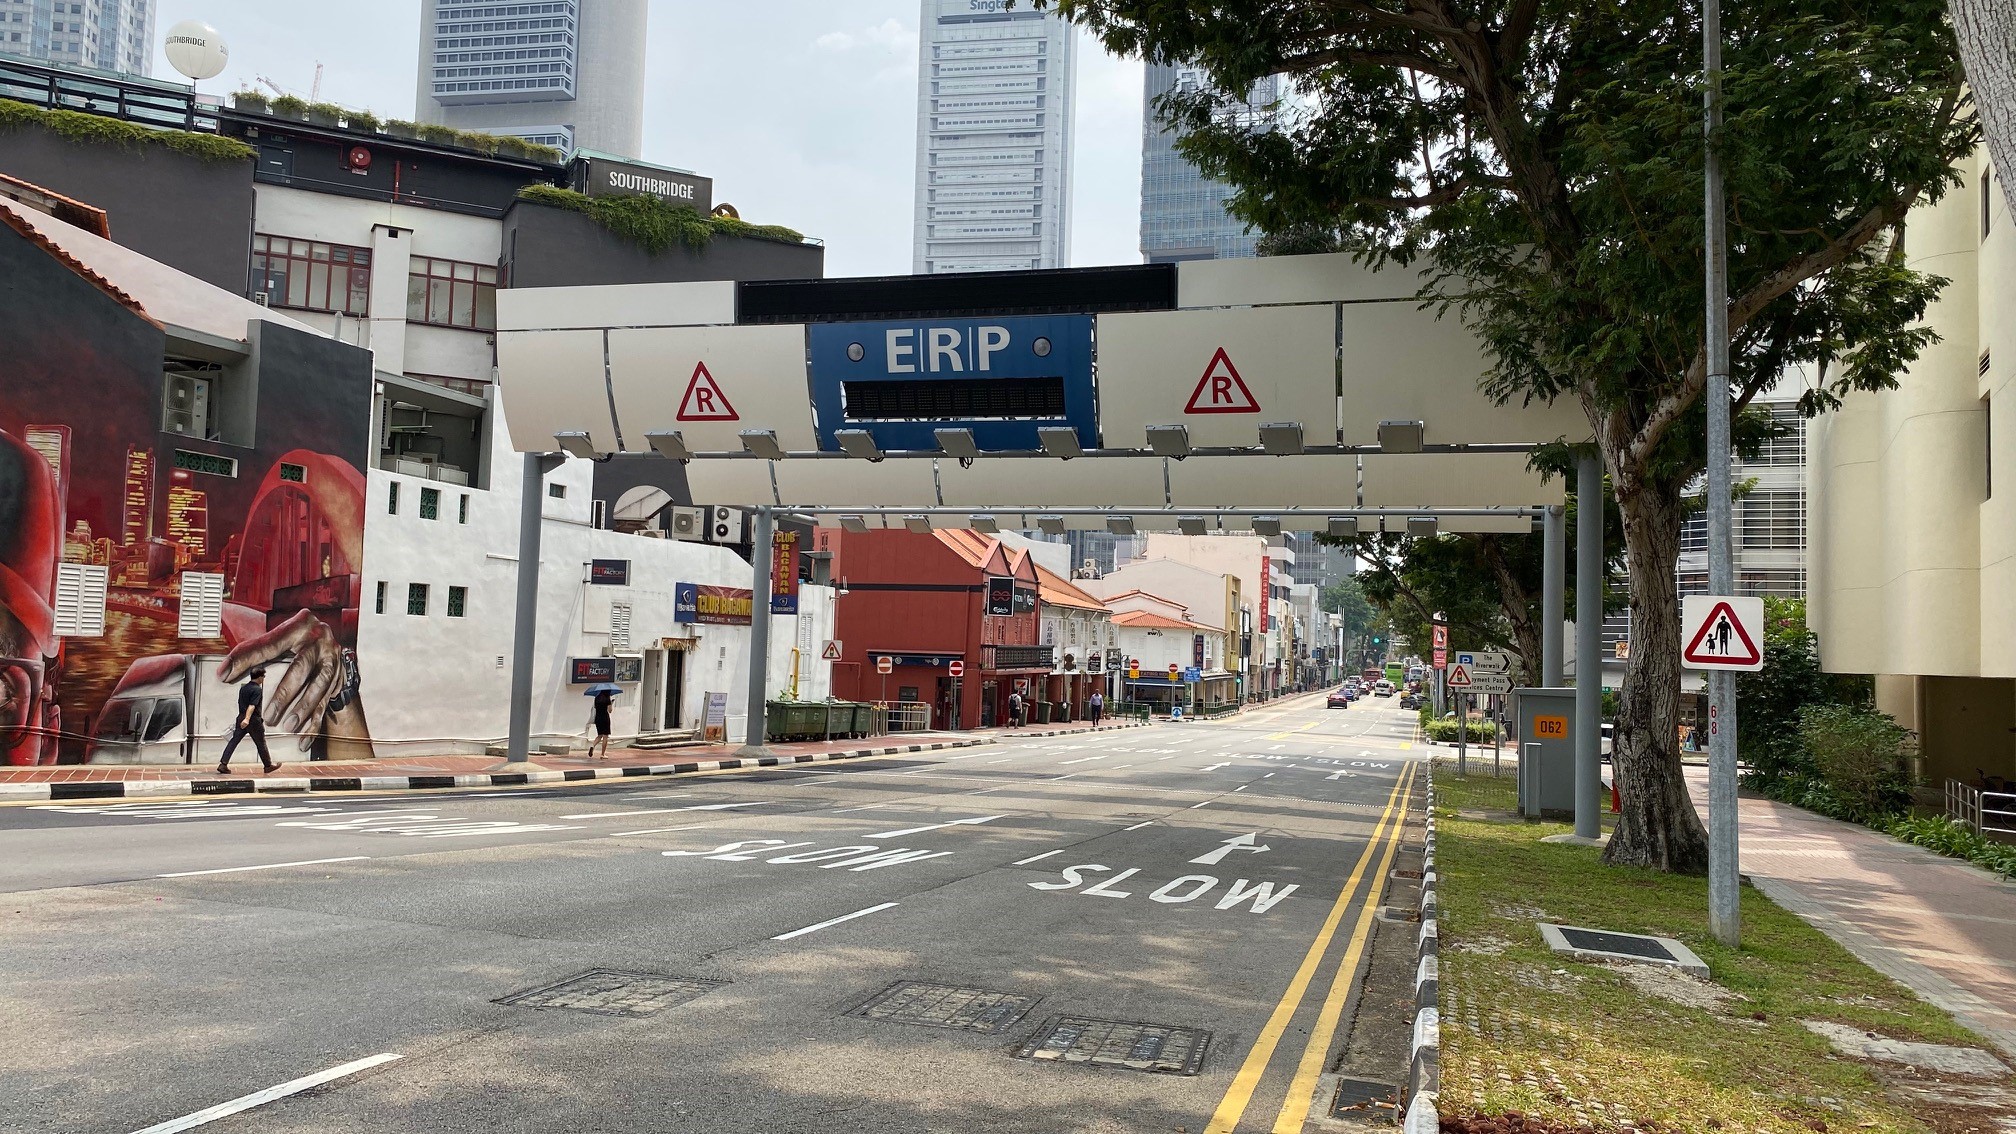 Electronic Road Pricing (ERP)